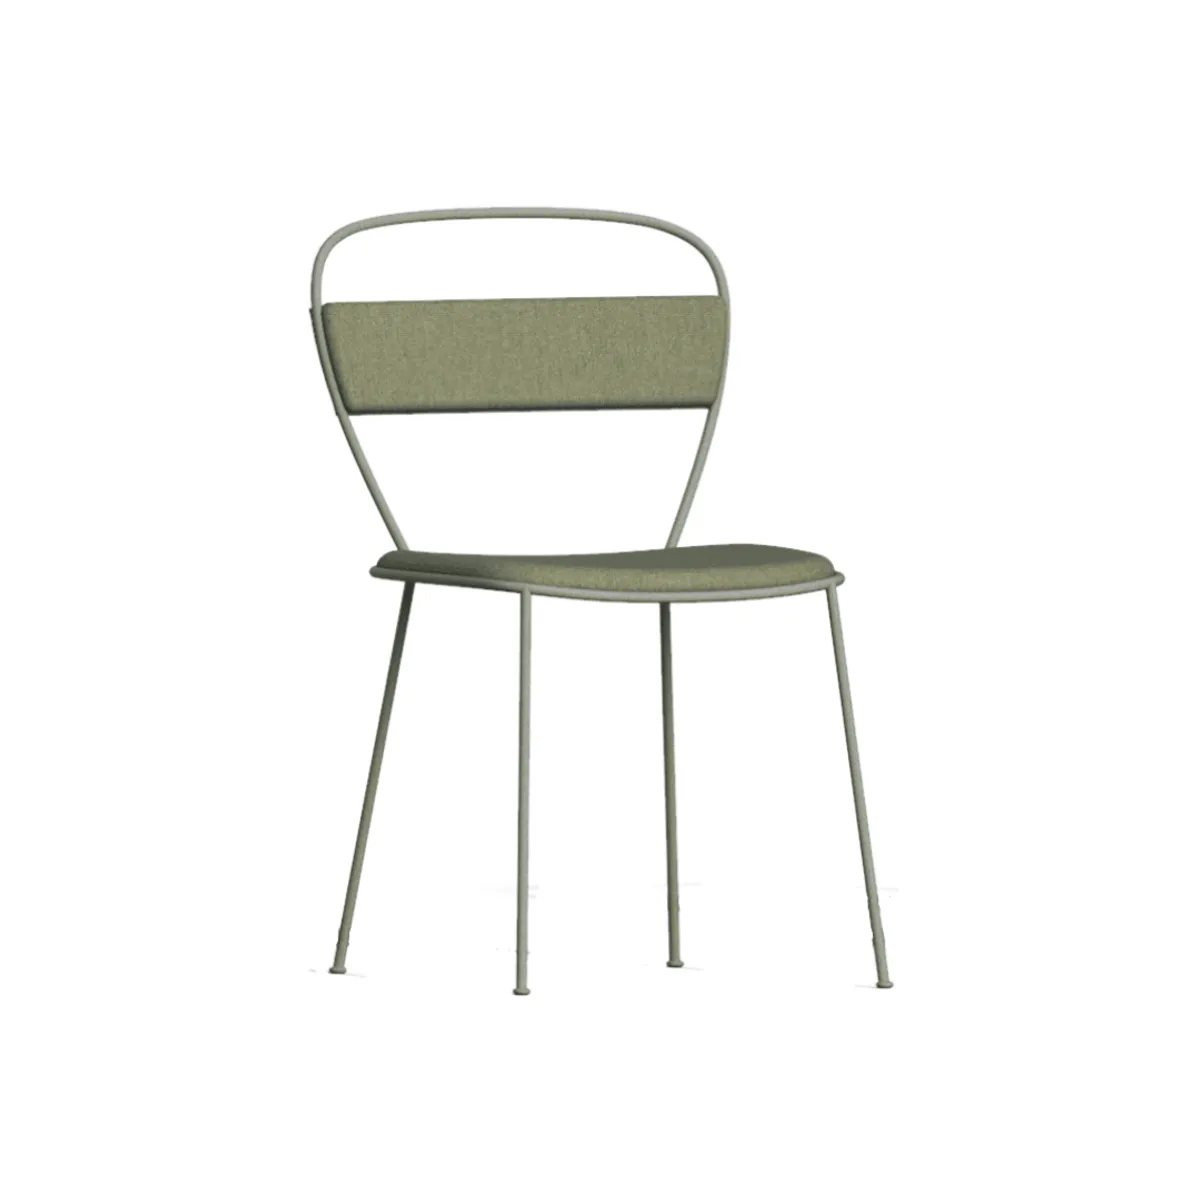 Sedna side chair 1